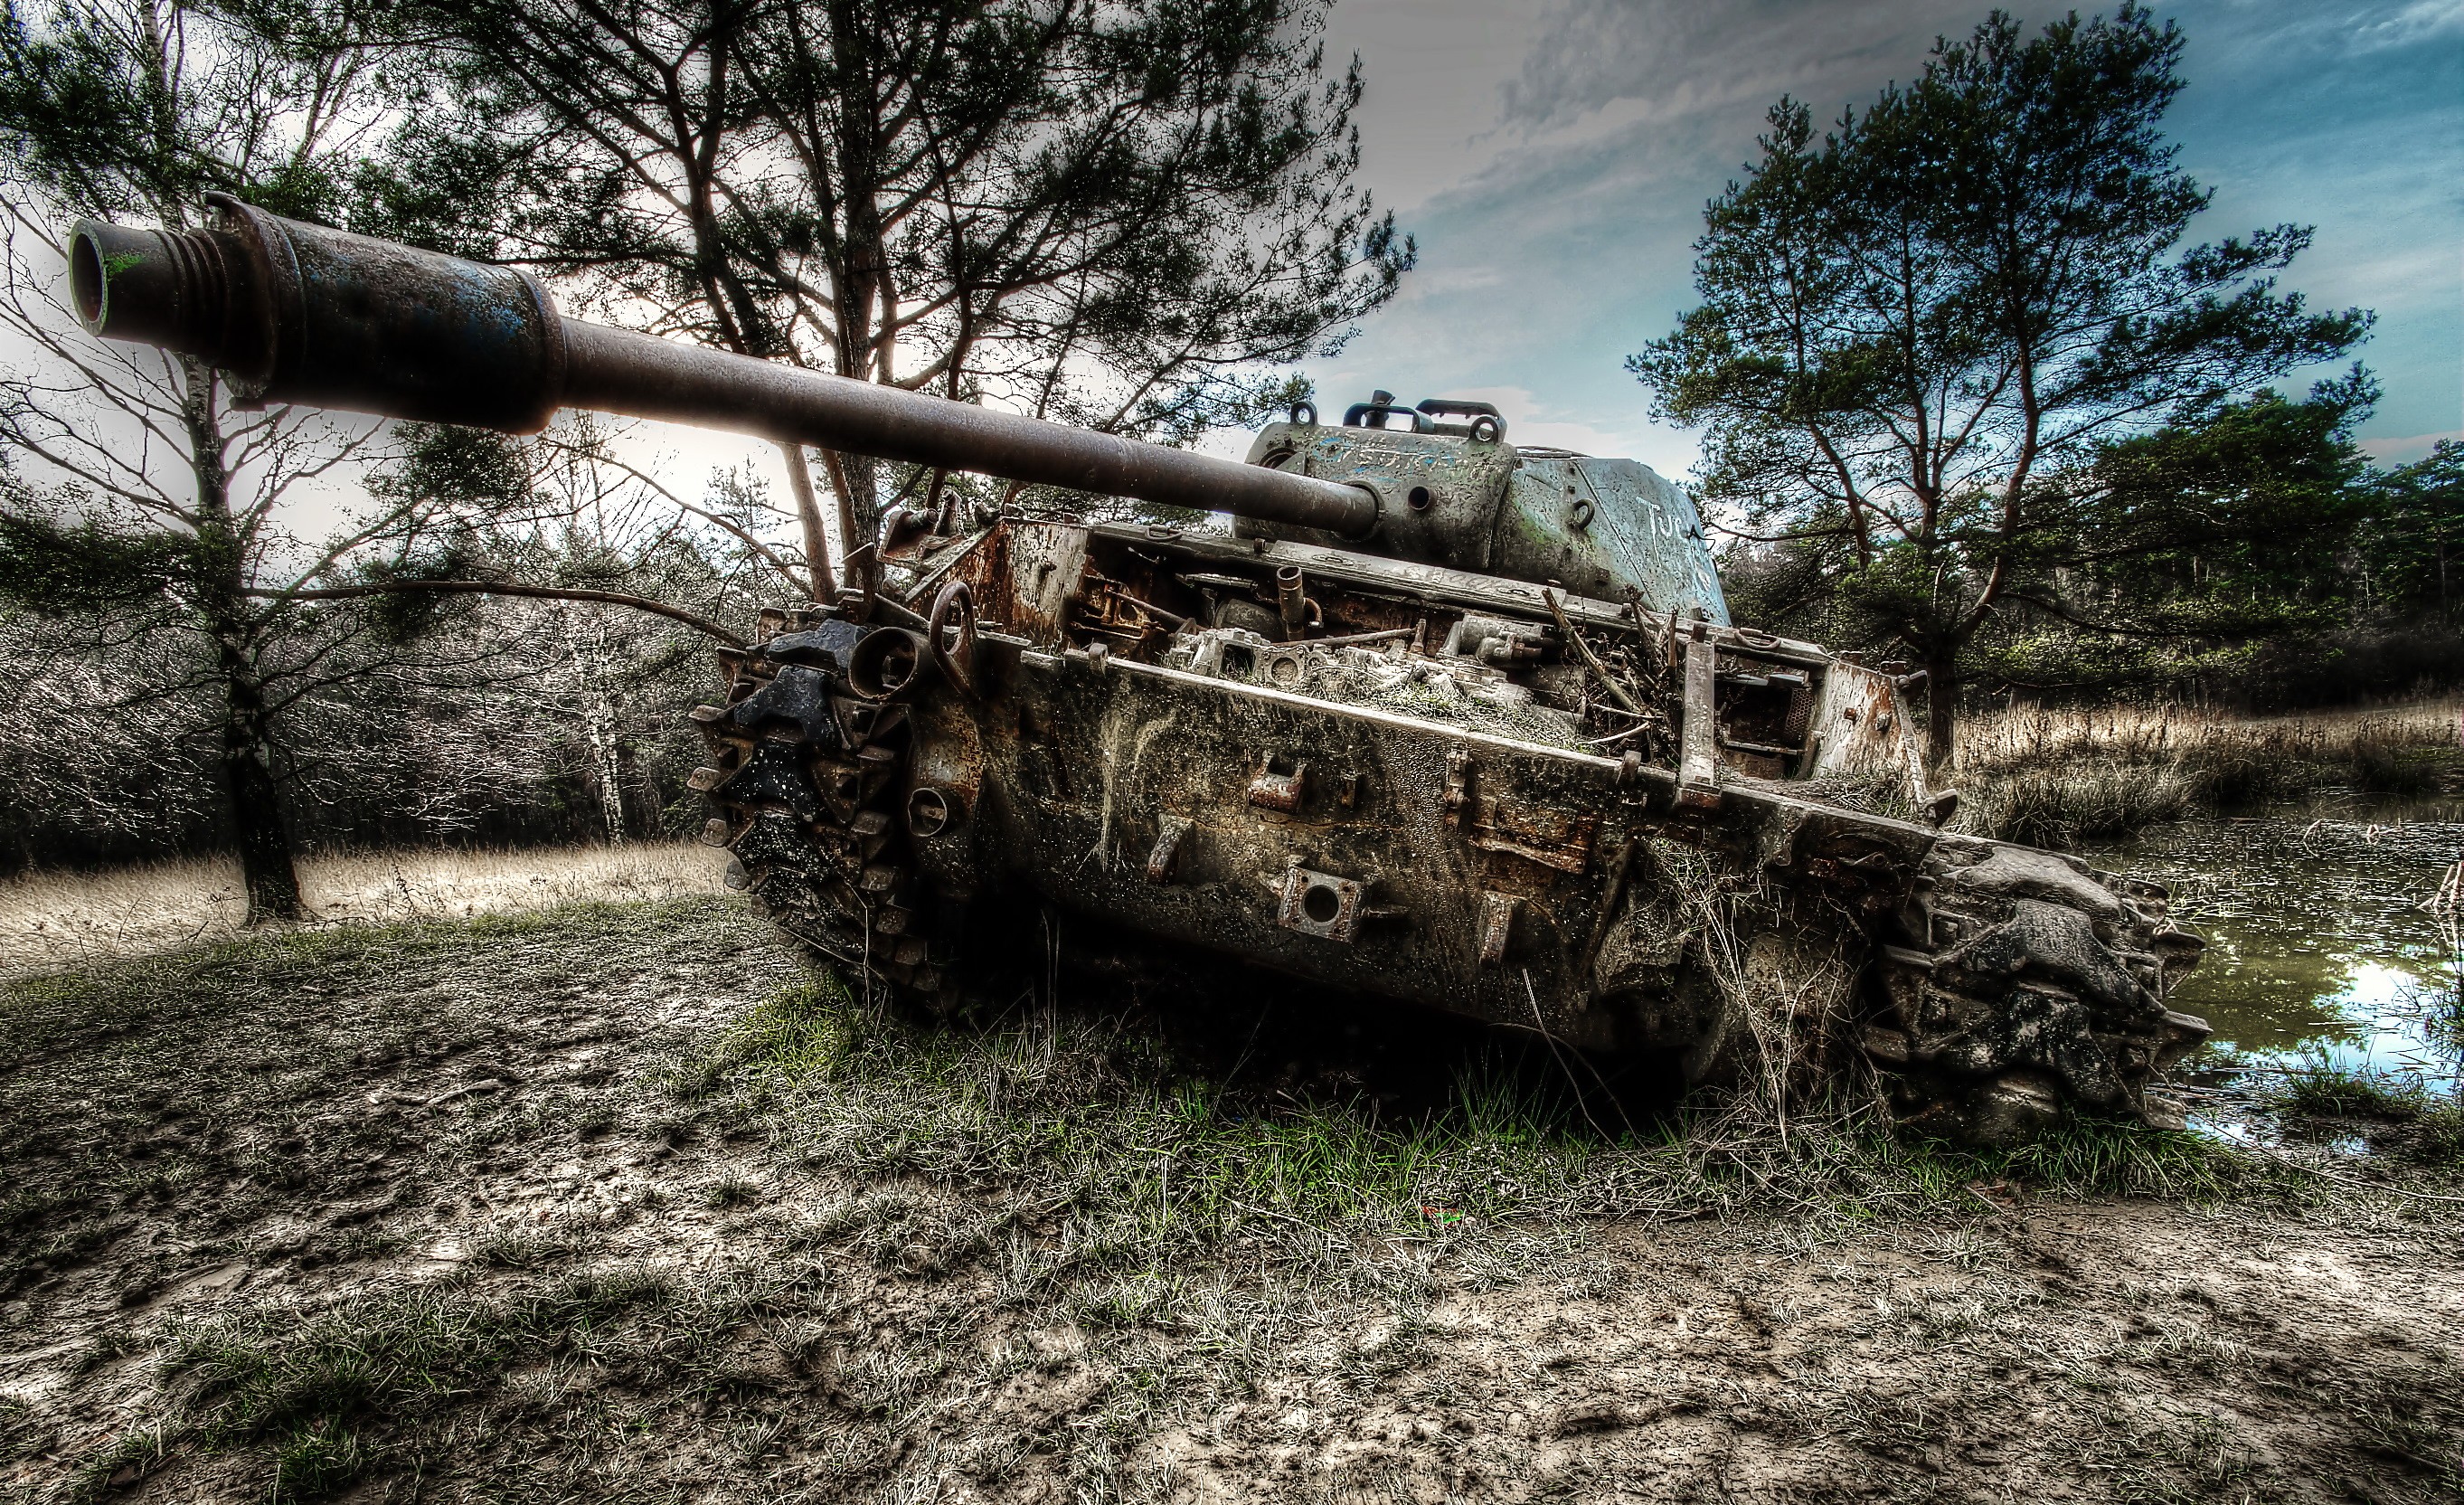 General 2725x1664 weapon military HDR M41 Walker Bulldog military vehicle vehicle American tanks wreck camouflage tank